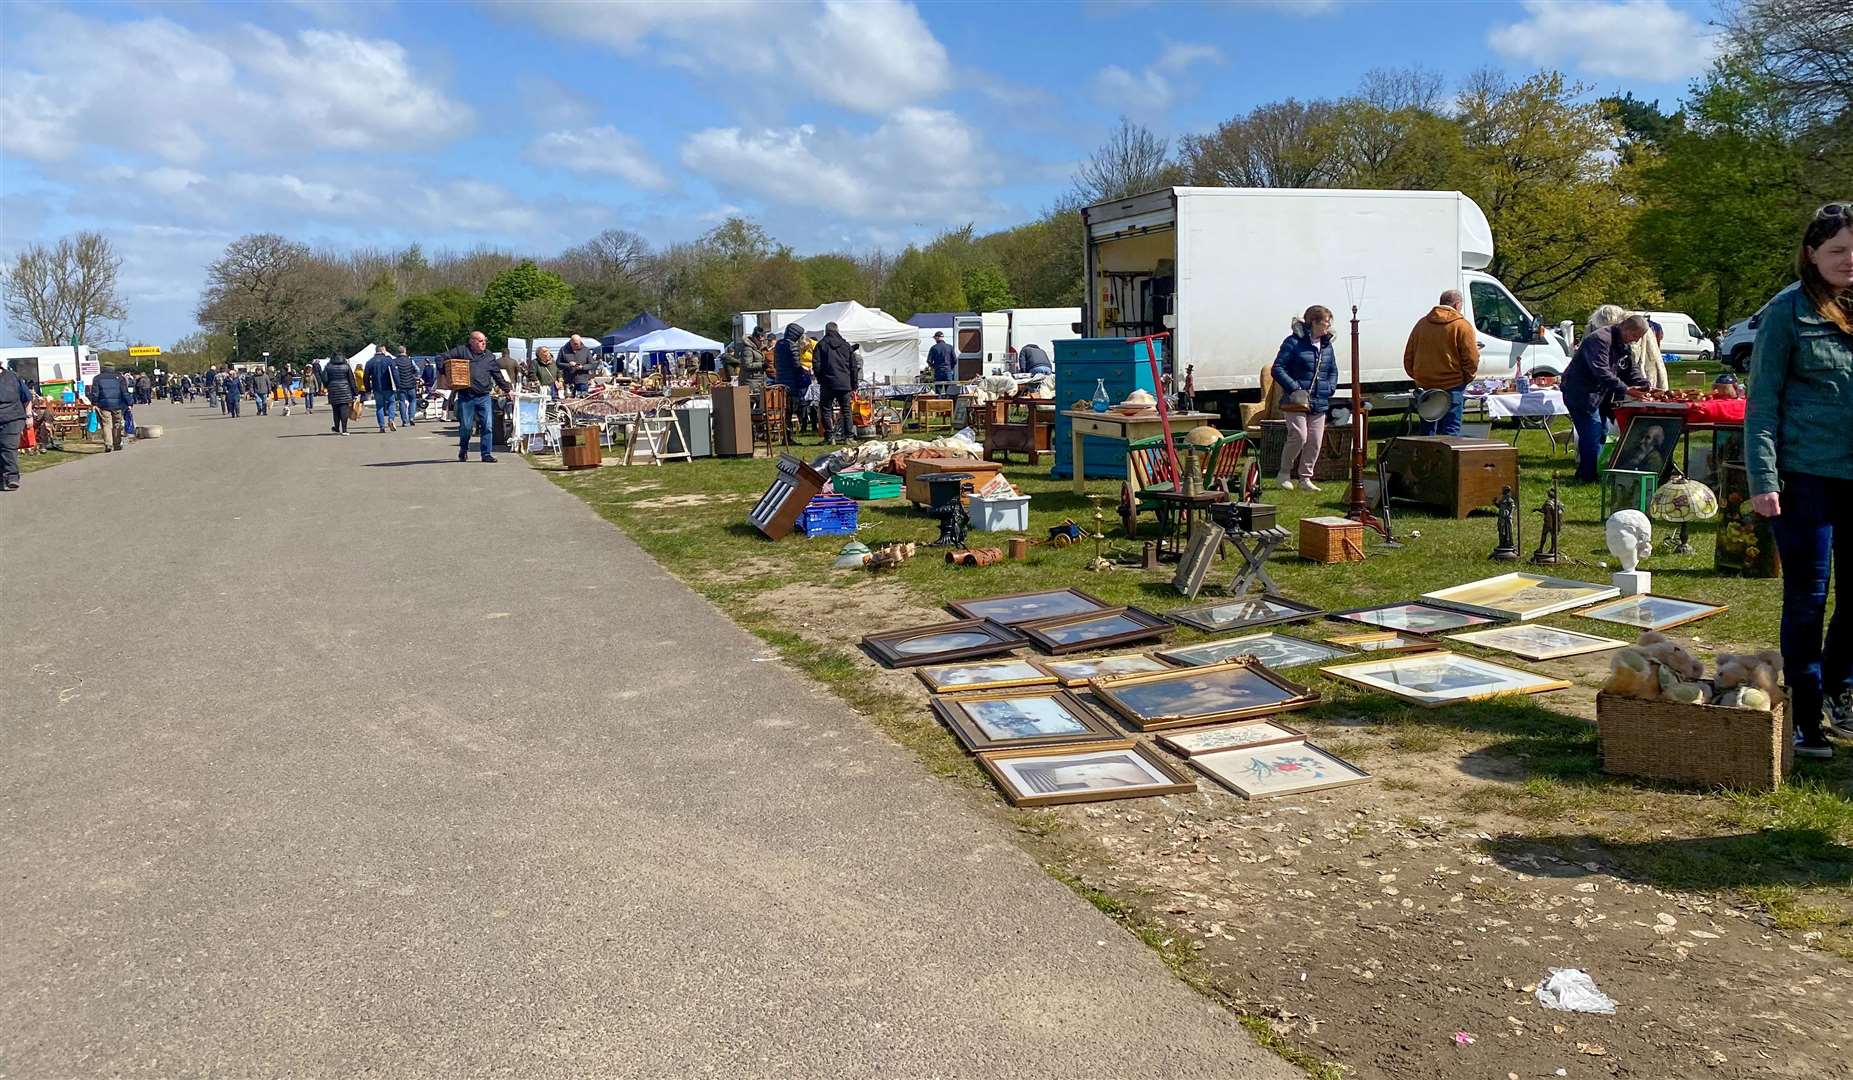 We visited the Detling Antiques and Vintage Fair over the weekend to see what treasures we could find